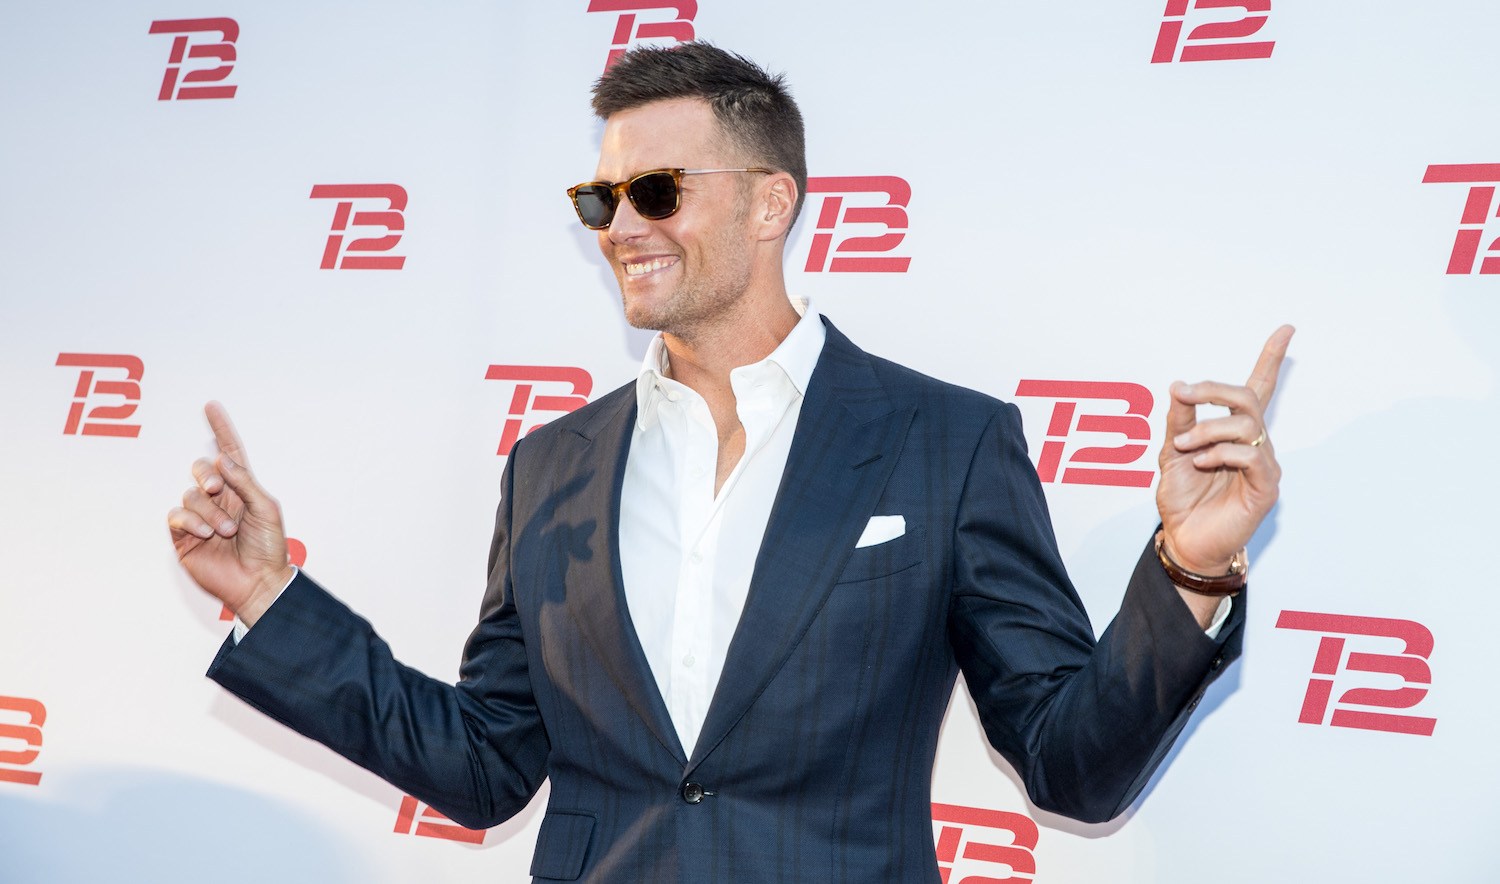 BOSTON, MA - SEPTEMBER 17: New England Patriots player Tom Brady at the grand opening of the TB12 Performance &amp; Recovery Center on September 17, 2019 in Boston, Massachusetts. (Photo by Scott Eisen/Getty Images)